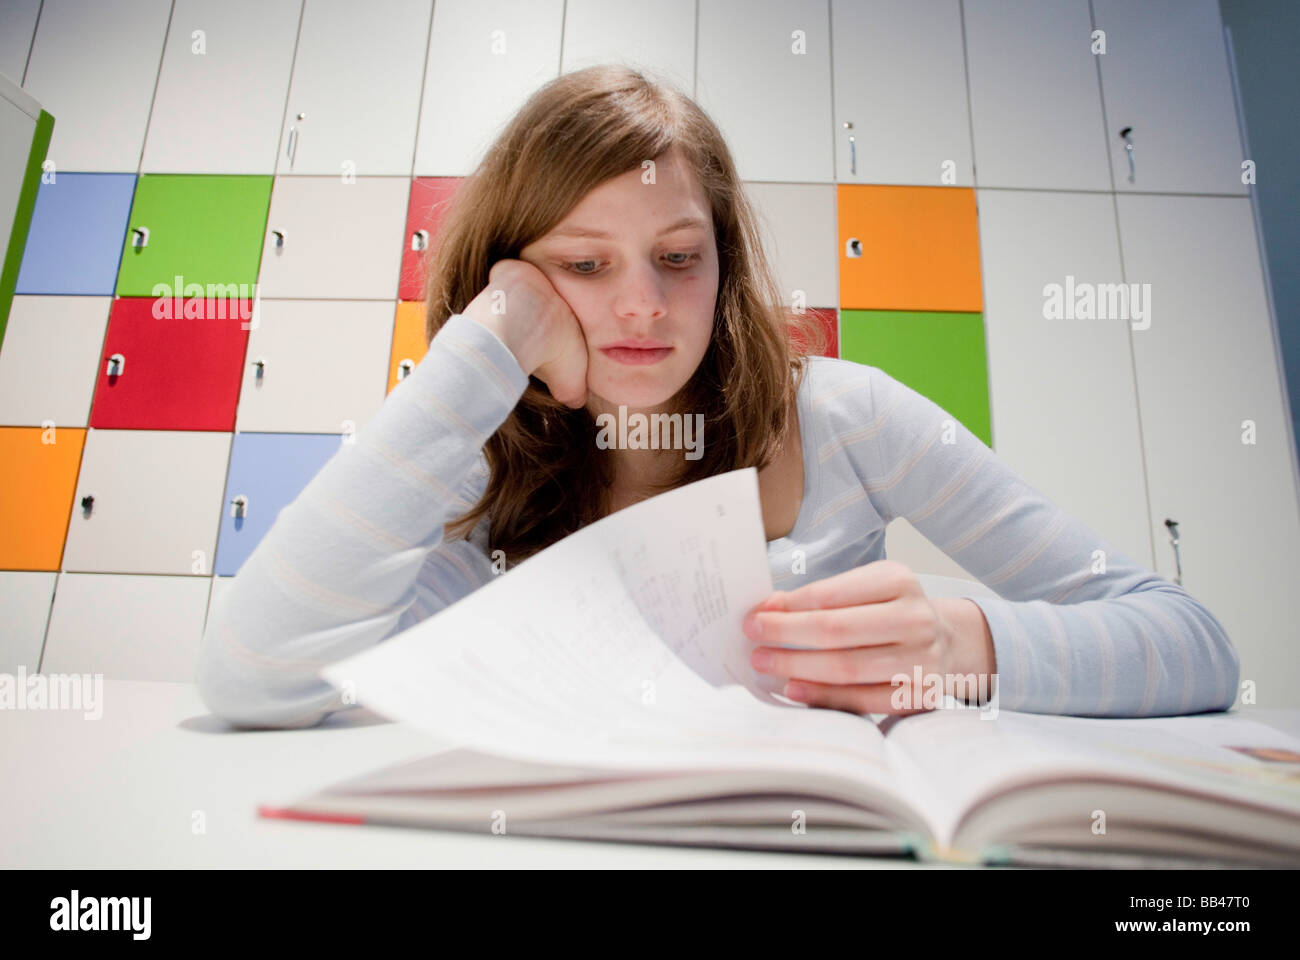 Student learning Stock Photo